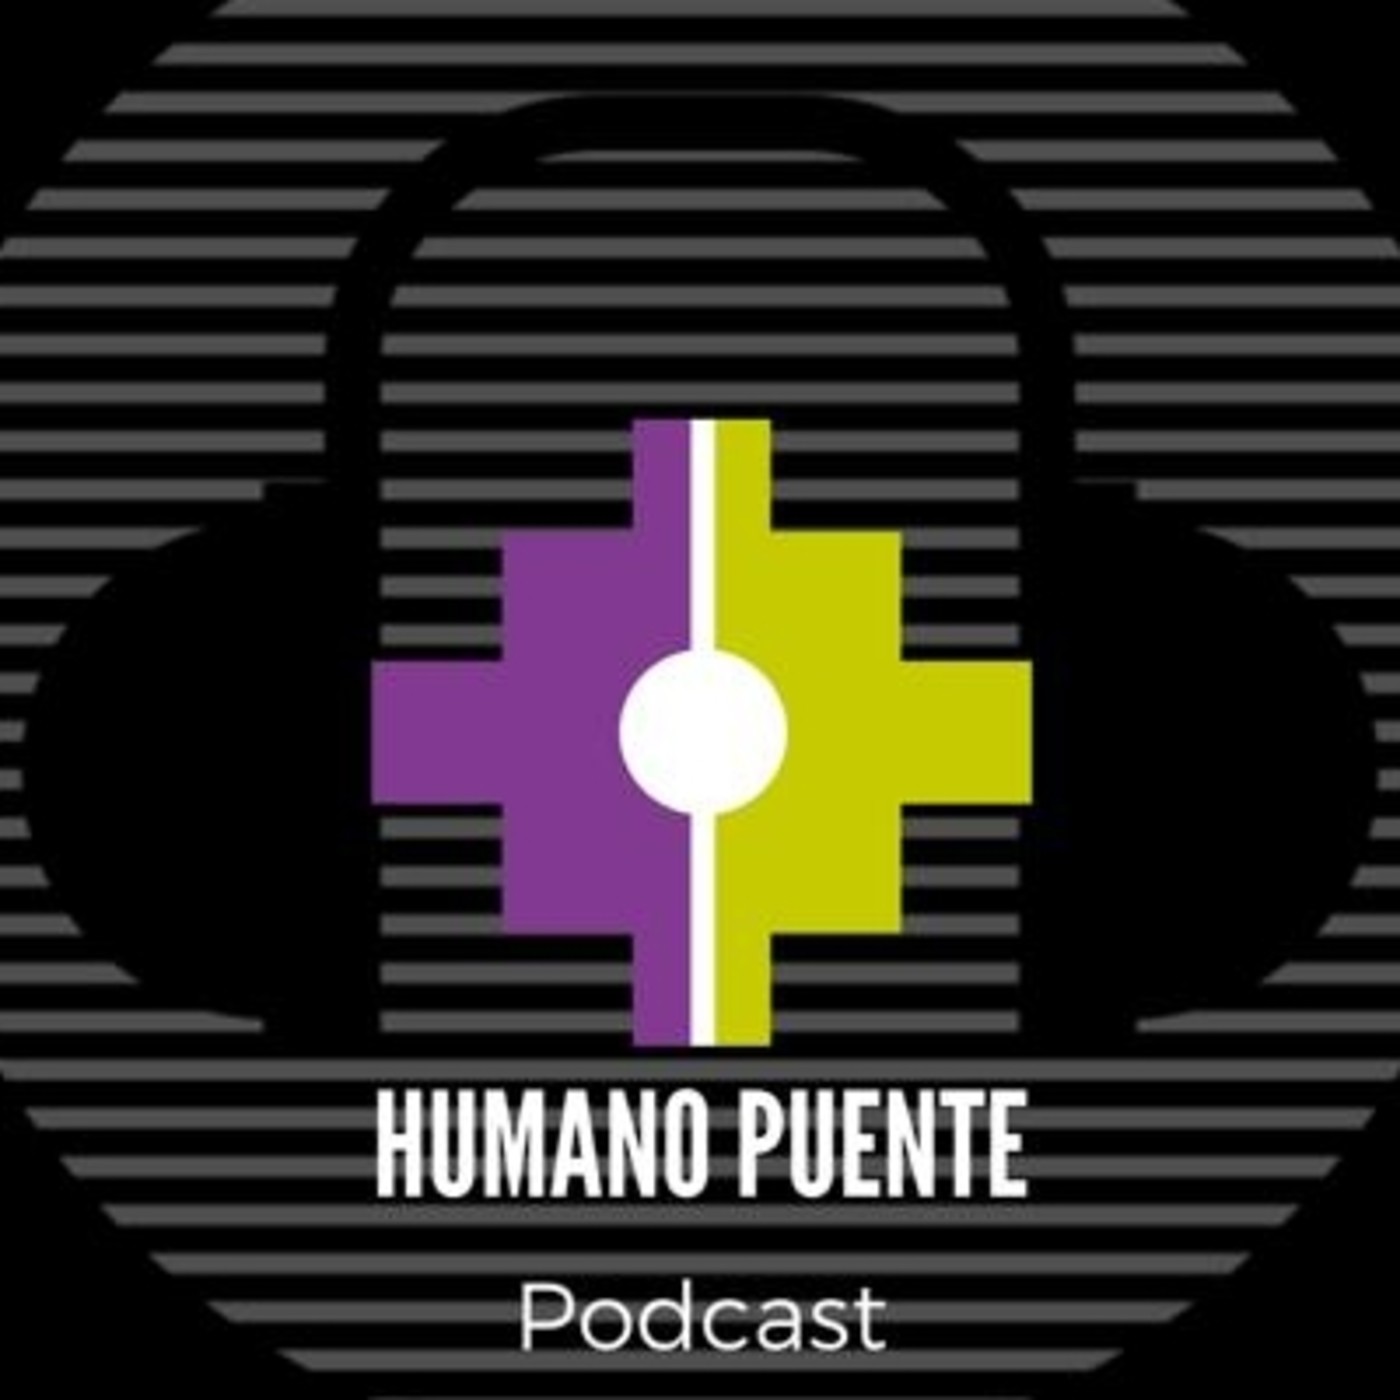 HUMANO PUENTE podcast